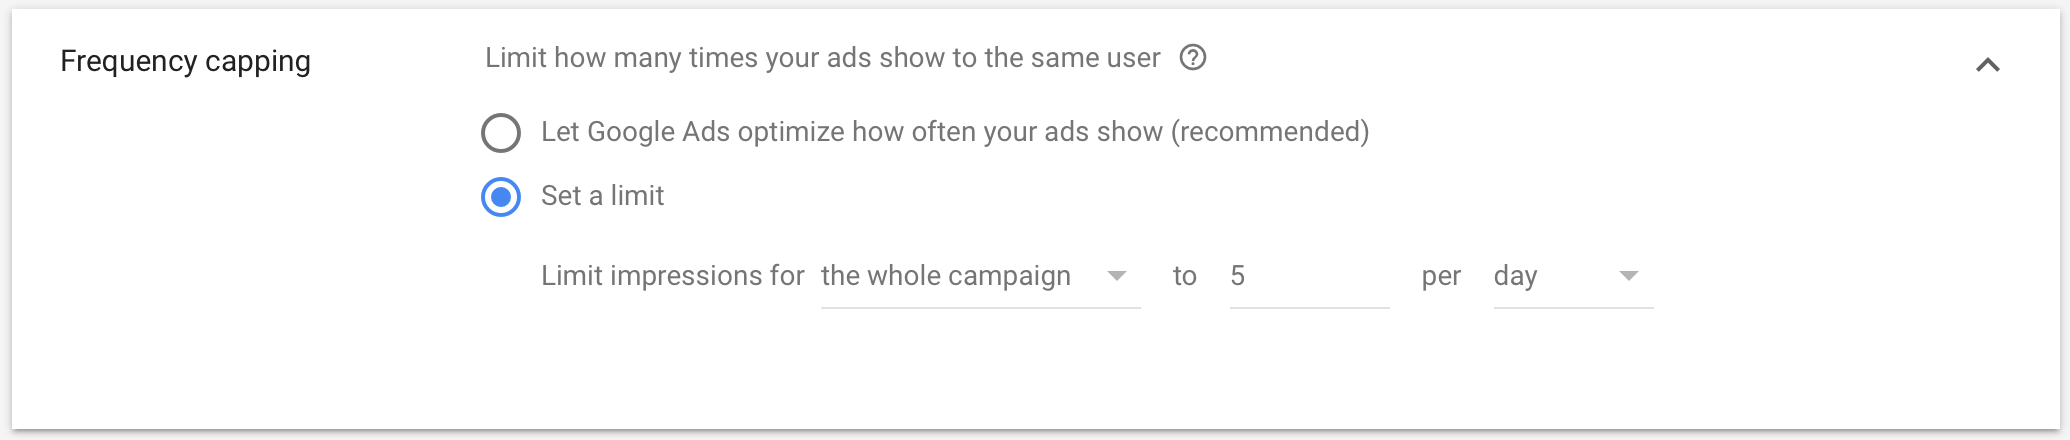 Google Ads Frequency Capping